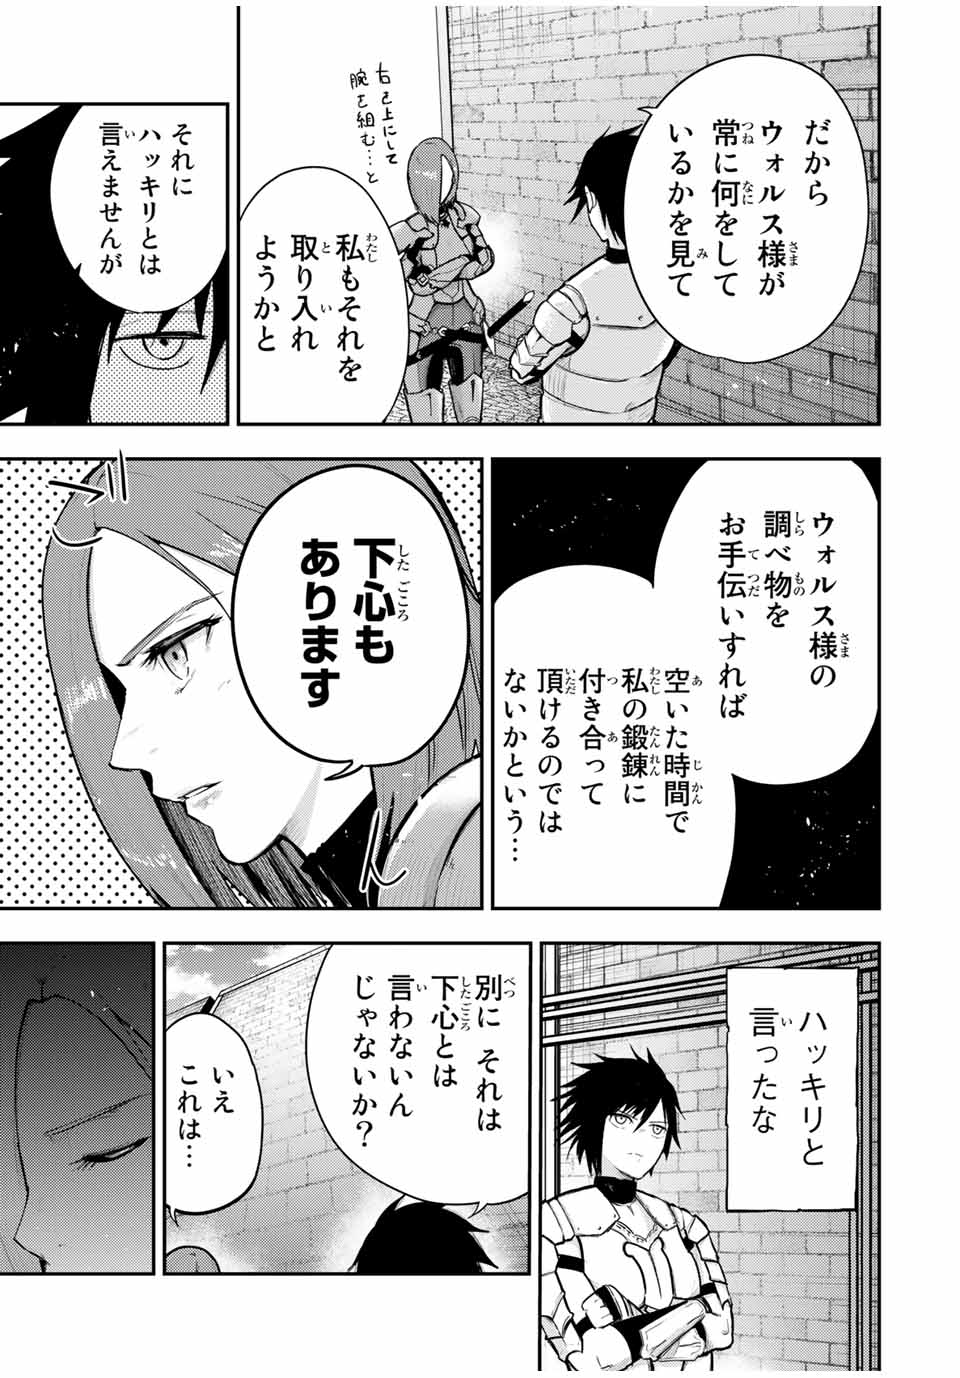 the strongest former prince-; 奴隷転生 ～その奴隷、最強の元王子につき～ 第32話 - Page 17